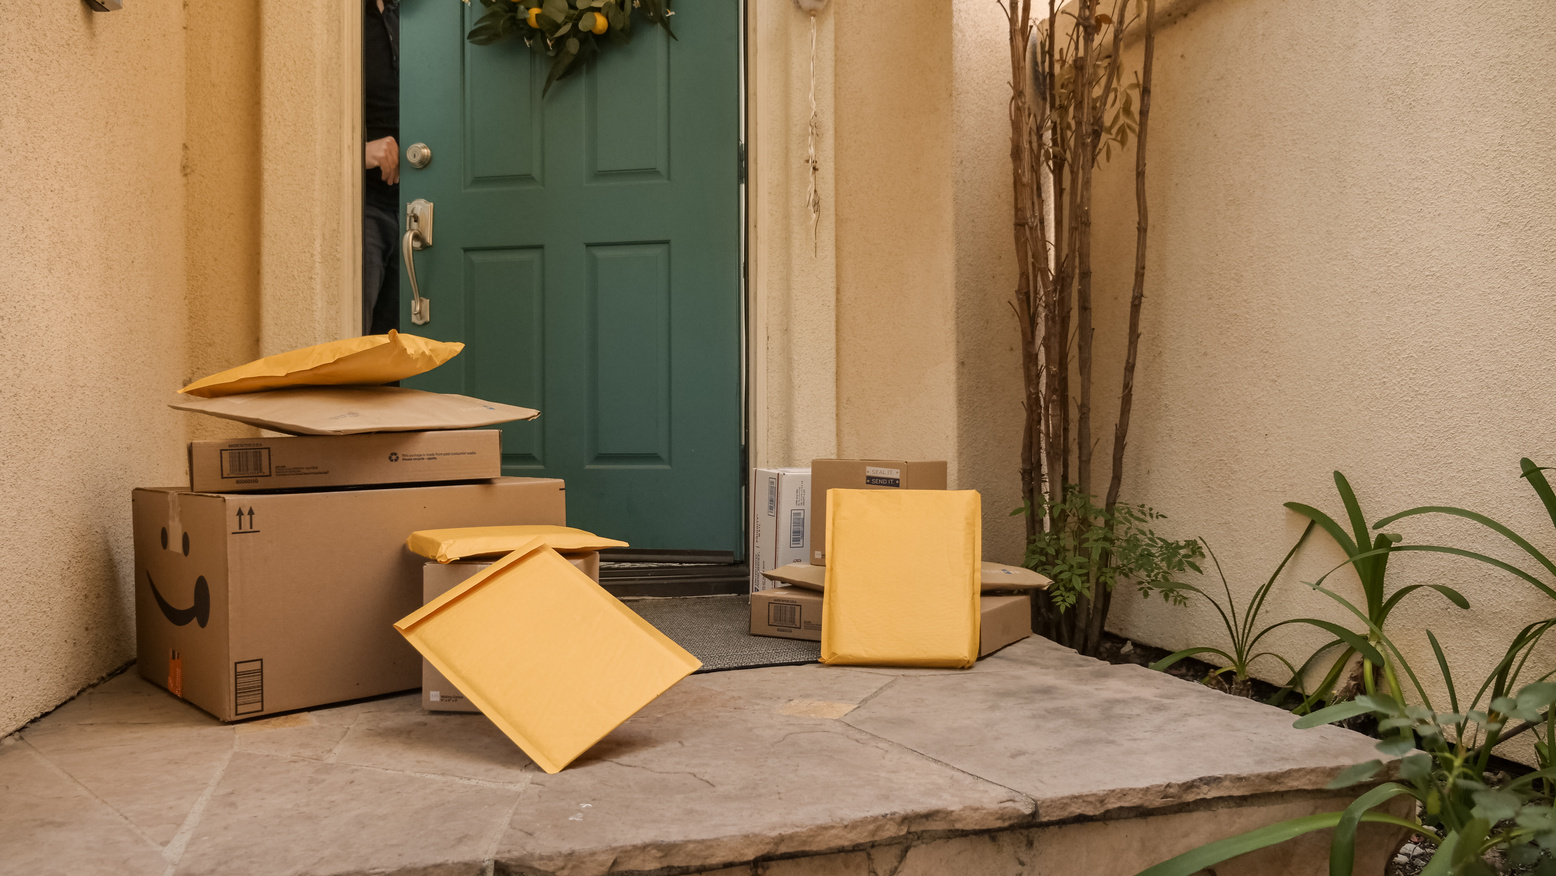 Packages on a Porch